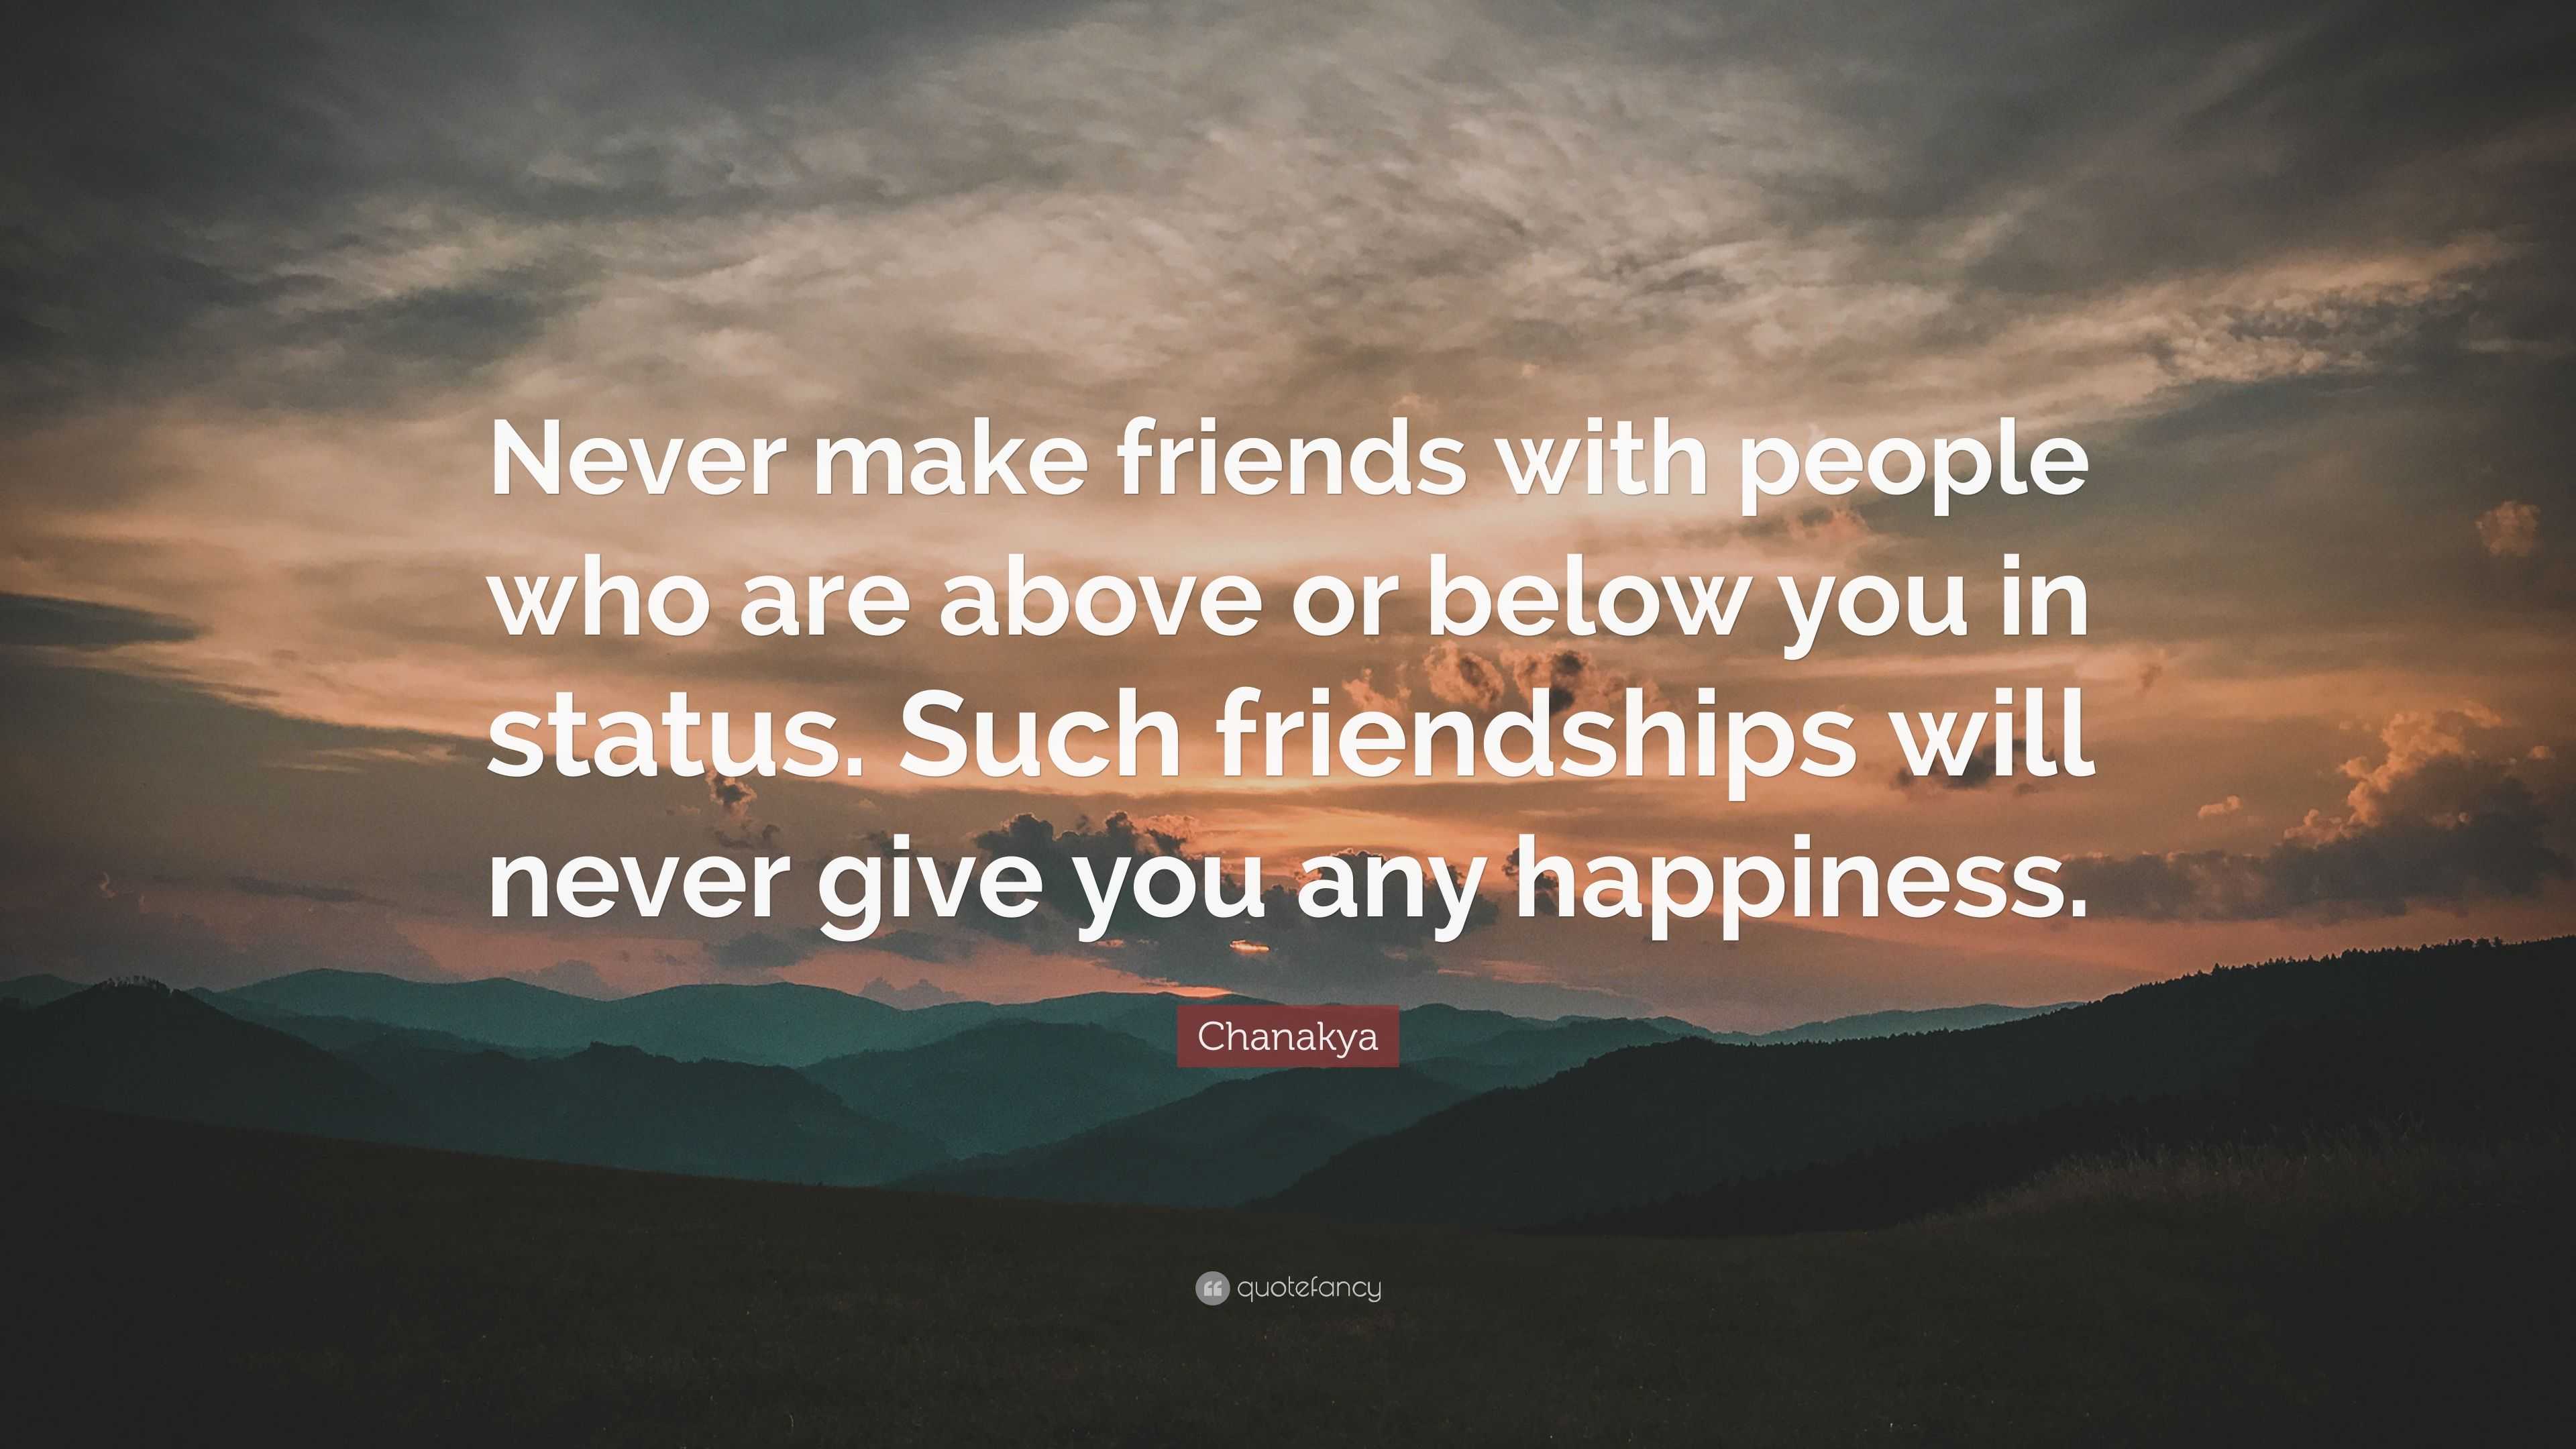 Chanakya Quote: “Never make friends with people who are above or below ...